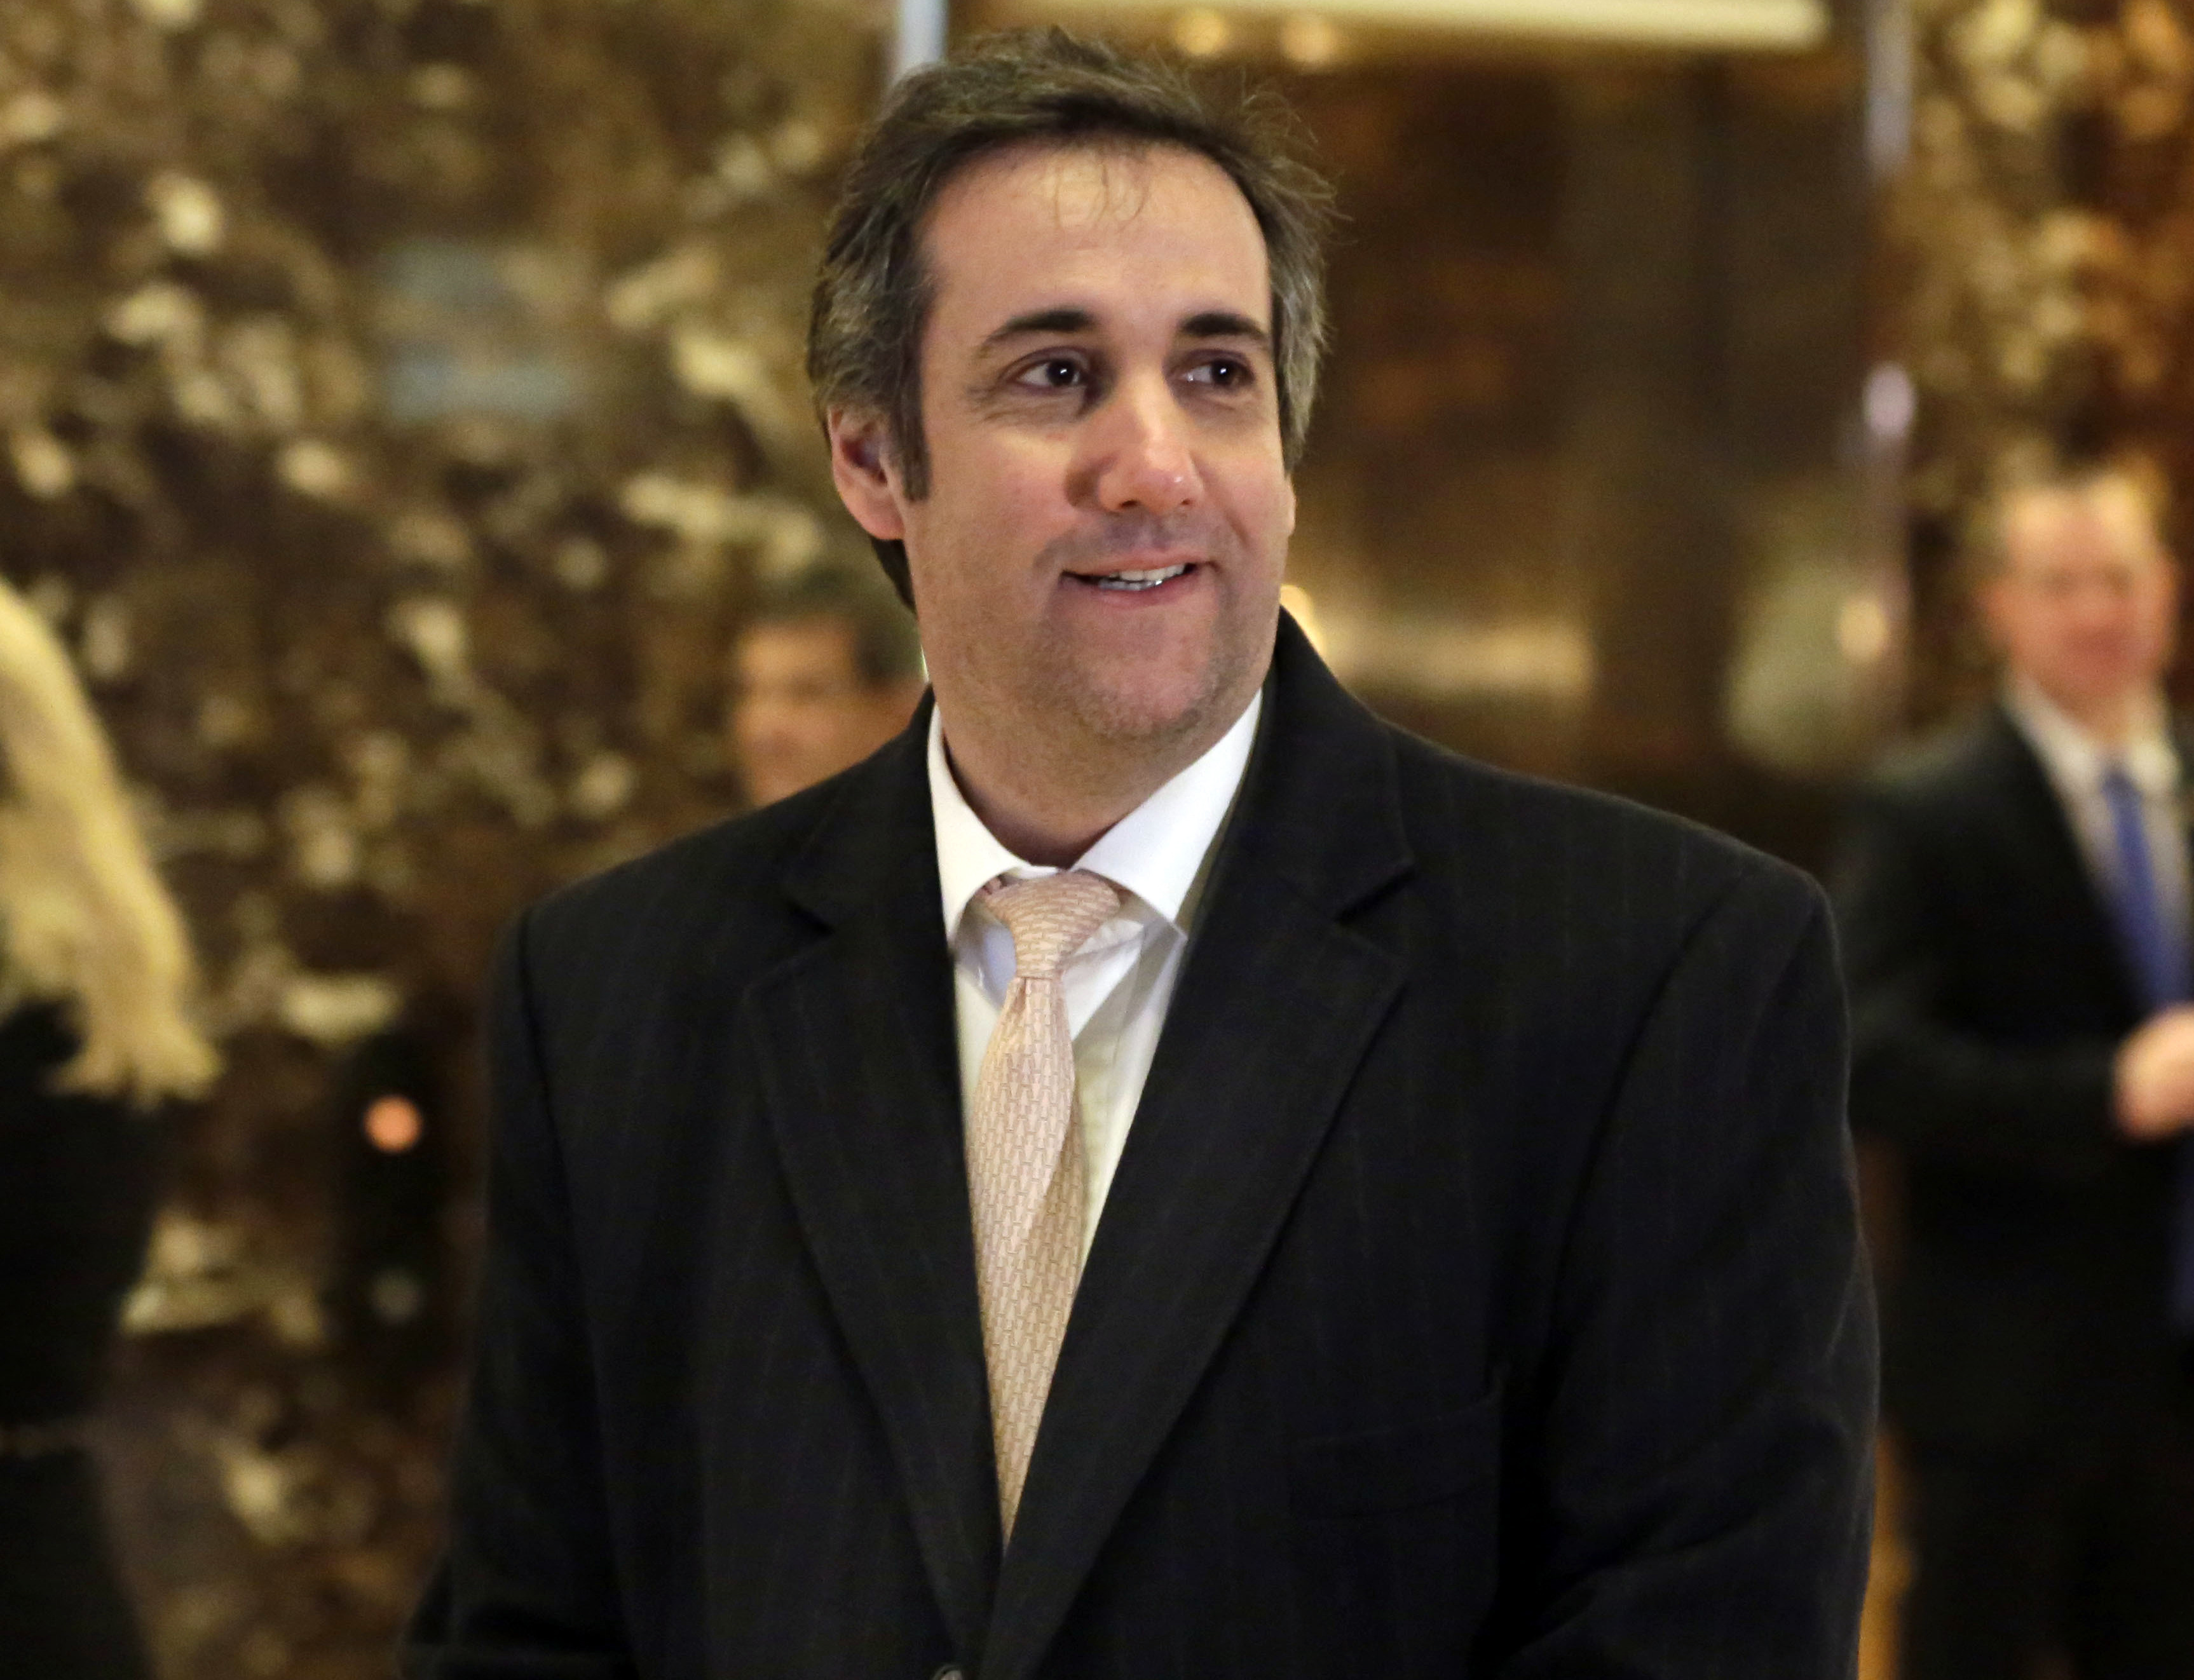 Michael Cohen, an attorney for Donald Trump, arrives in Trump Tower in New York on Dec. 16, 2016. (Richard Drew—AP)